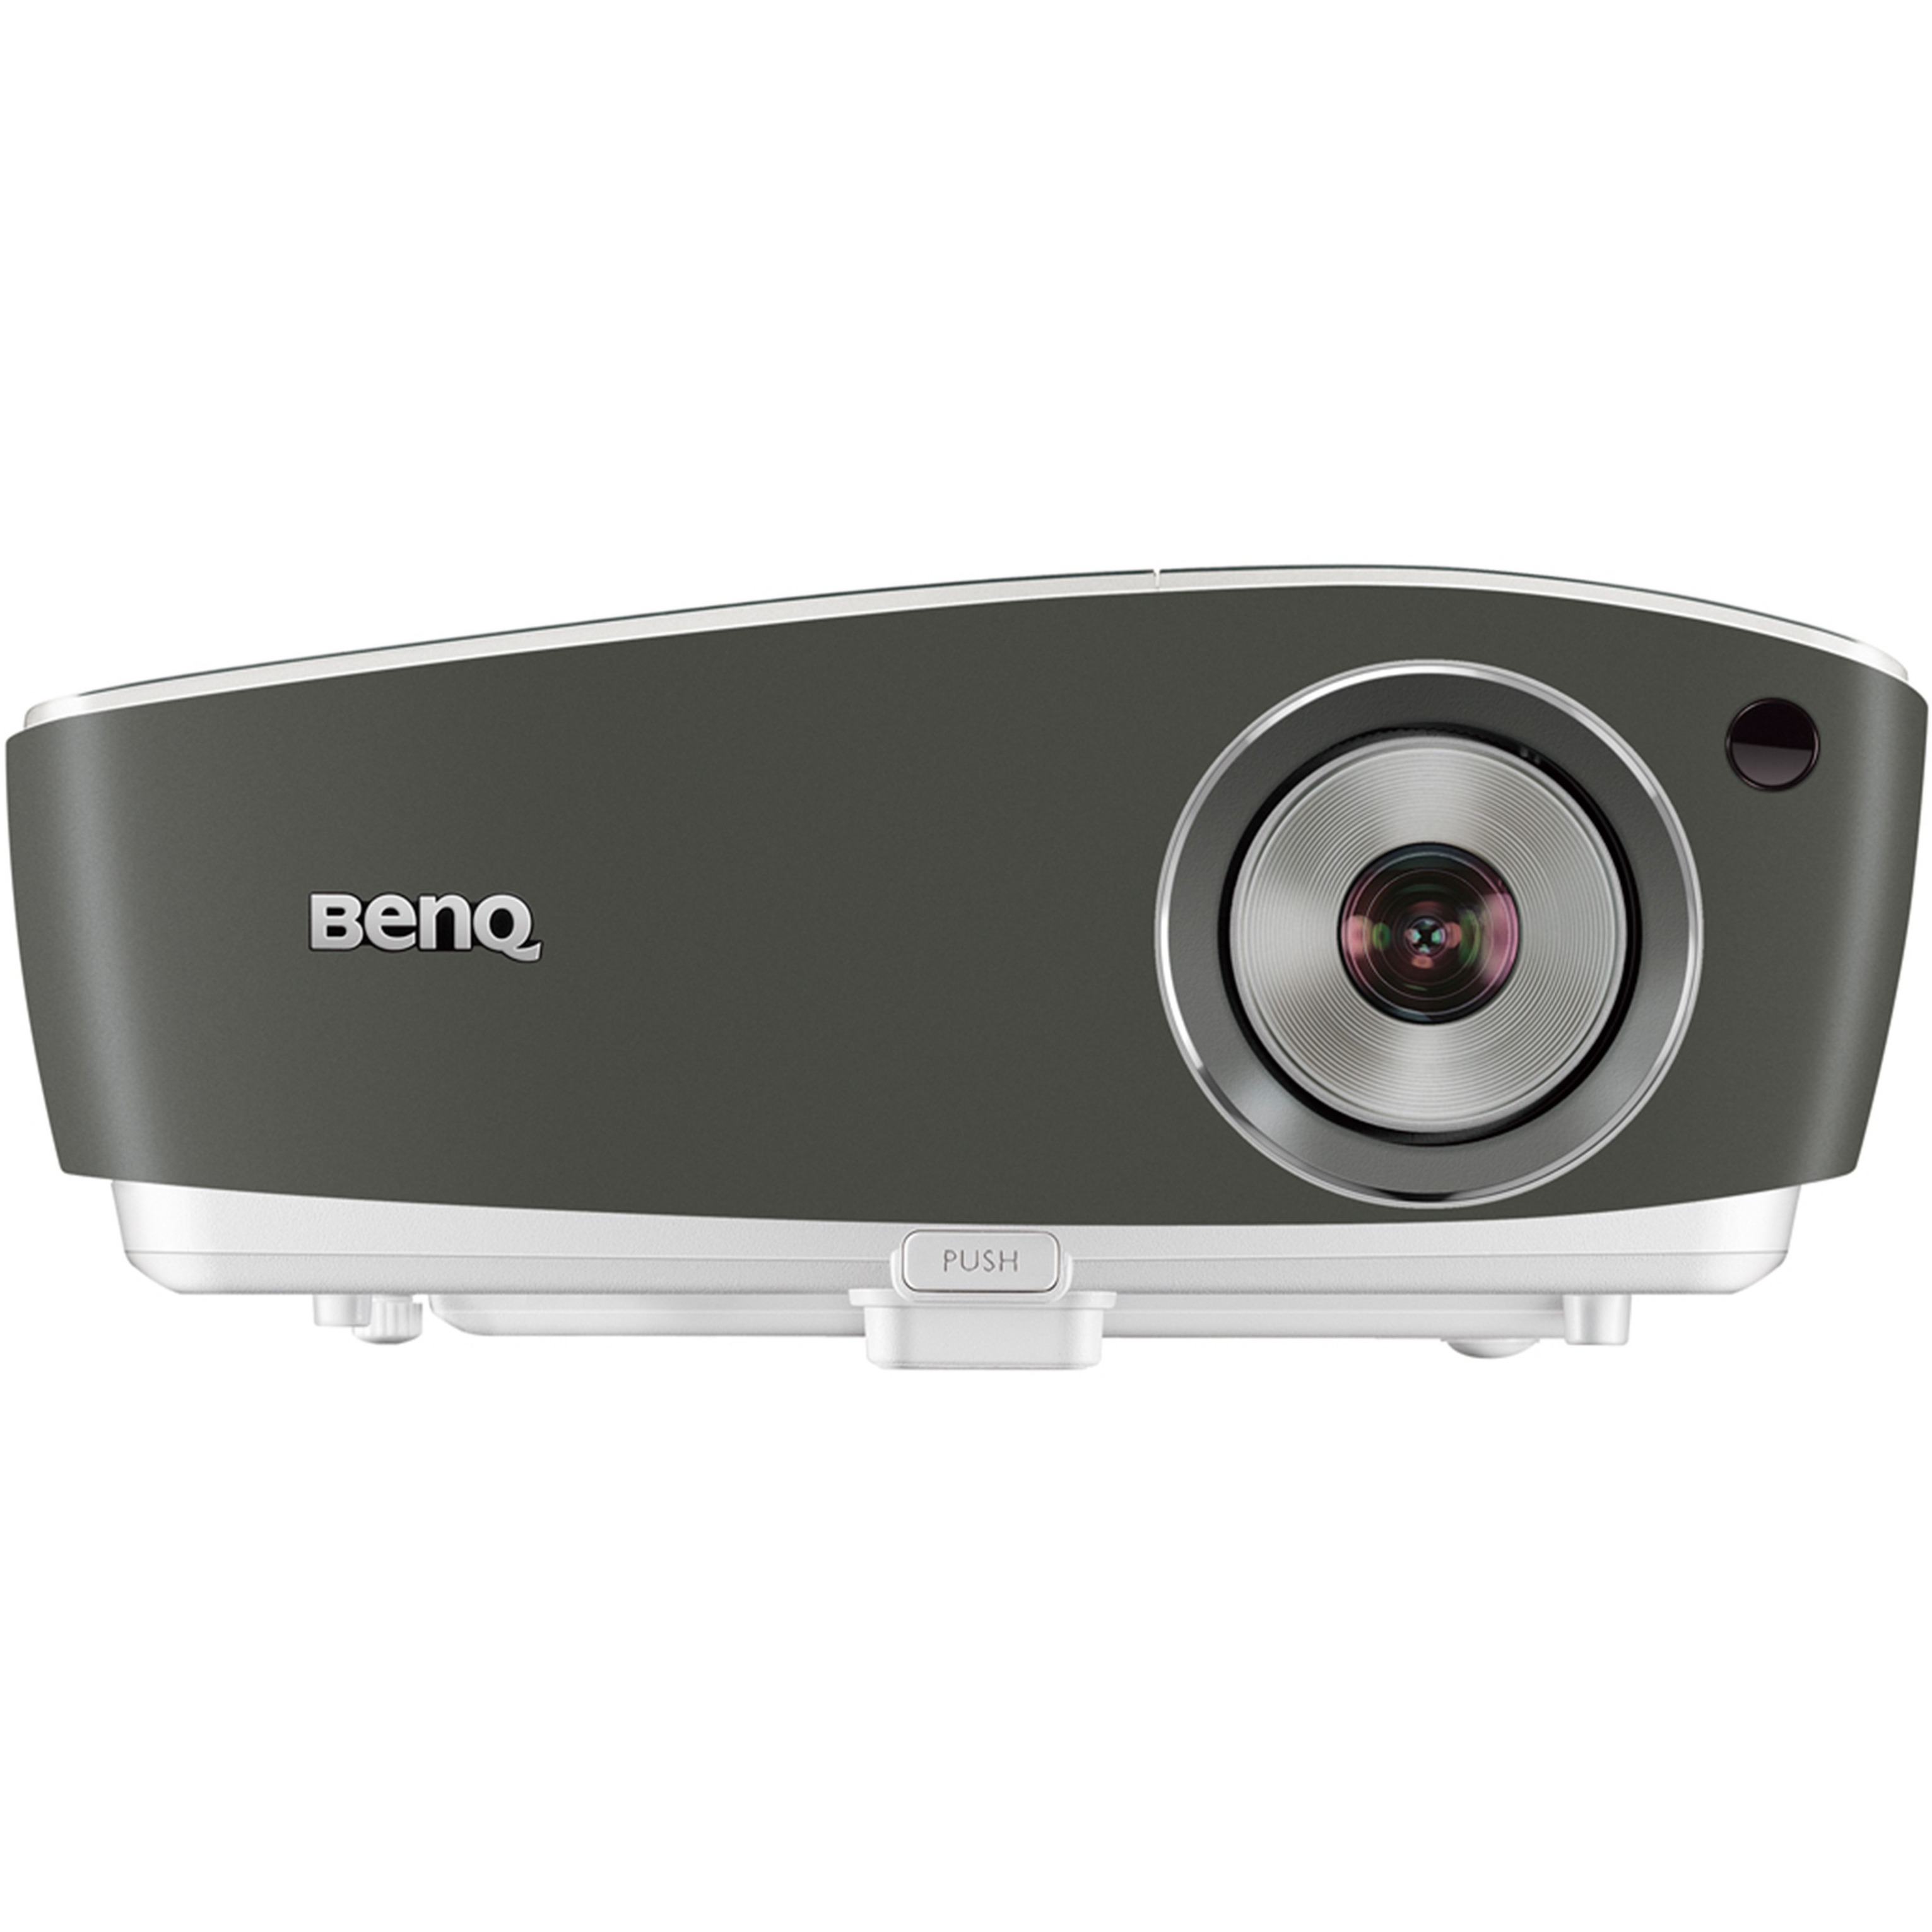 BenQ TH670 3D Ready DLP Projector, 16:9 - image 3 of 6